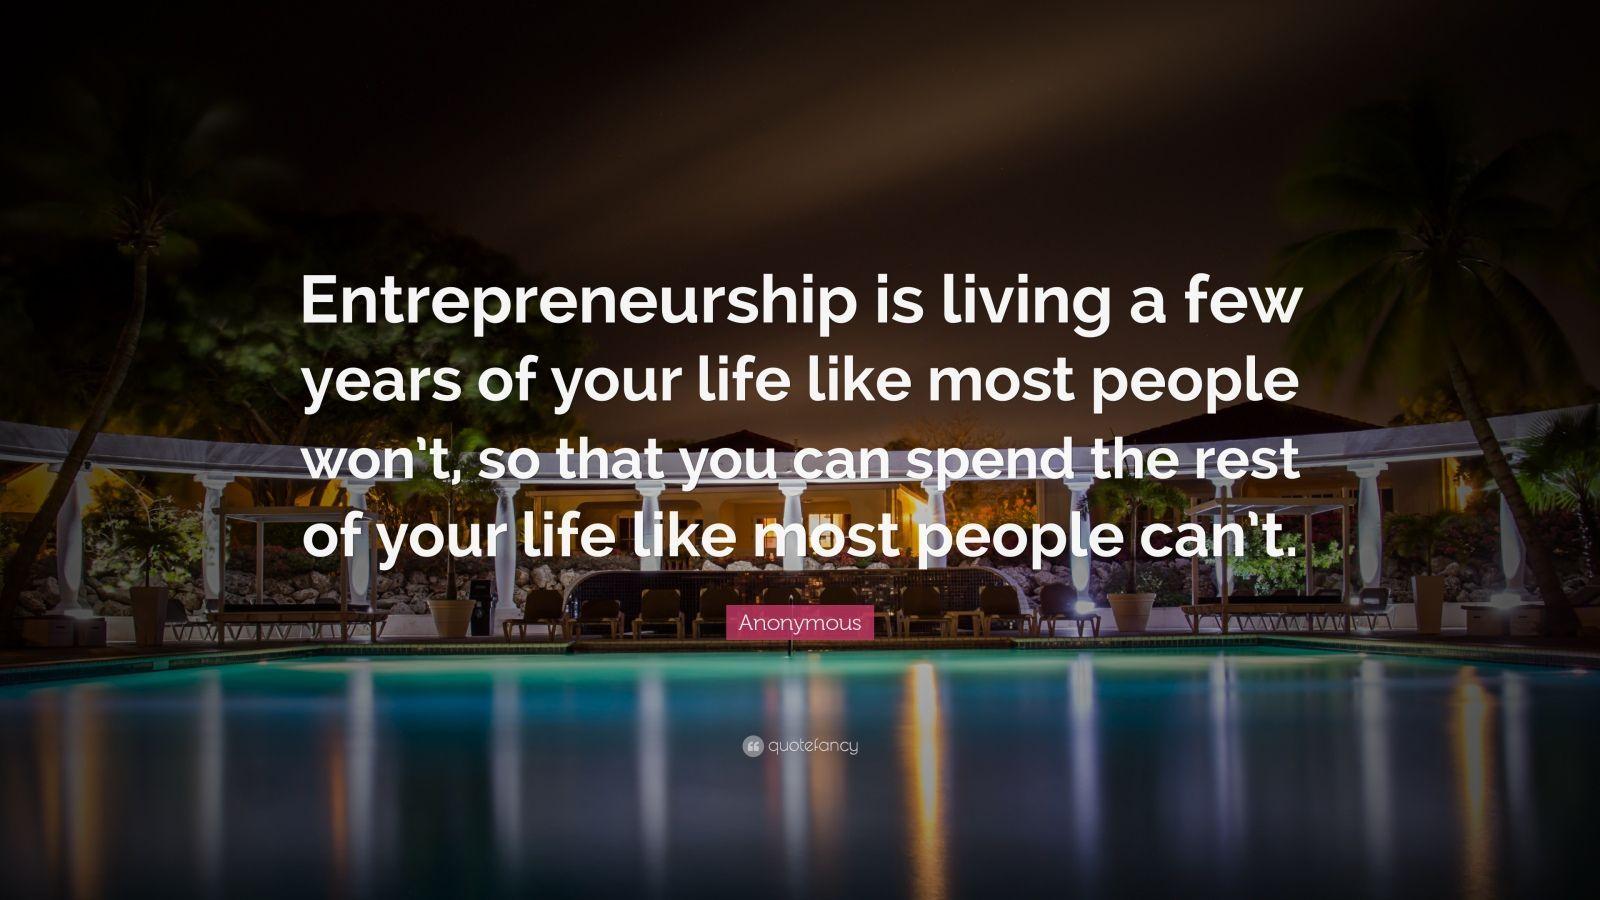 Anonymous Quote: “Entrepreneurship is living a few years of your life like most people won't, so that you can spend the rest of your life .” (27 wallpaper)